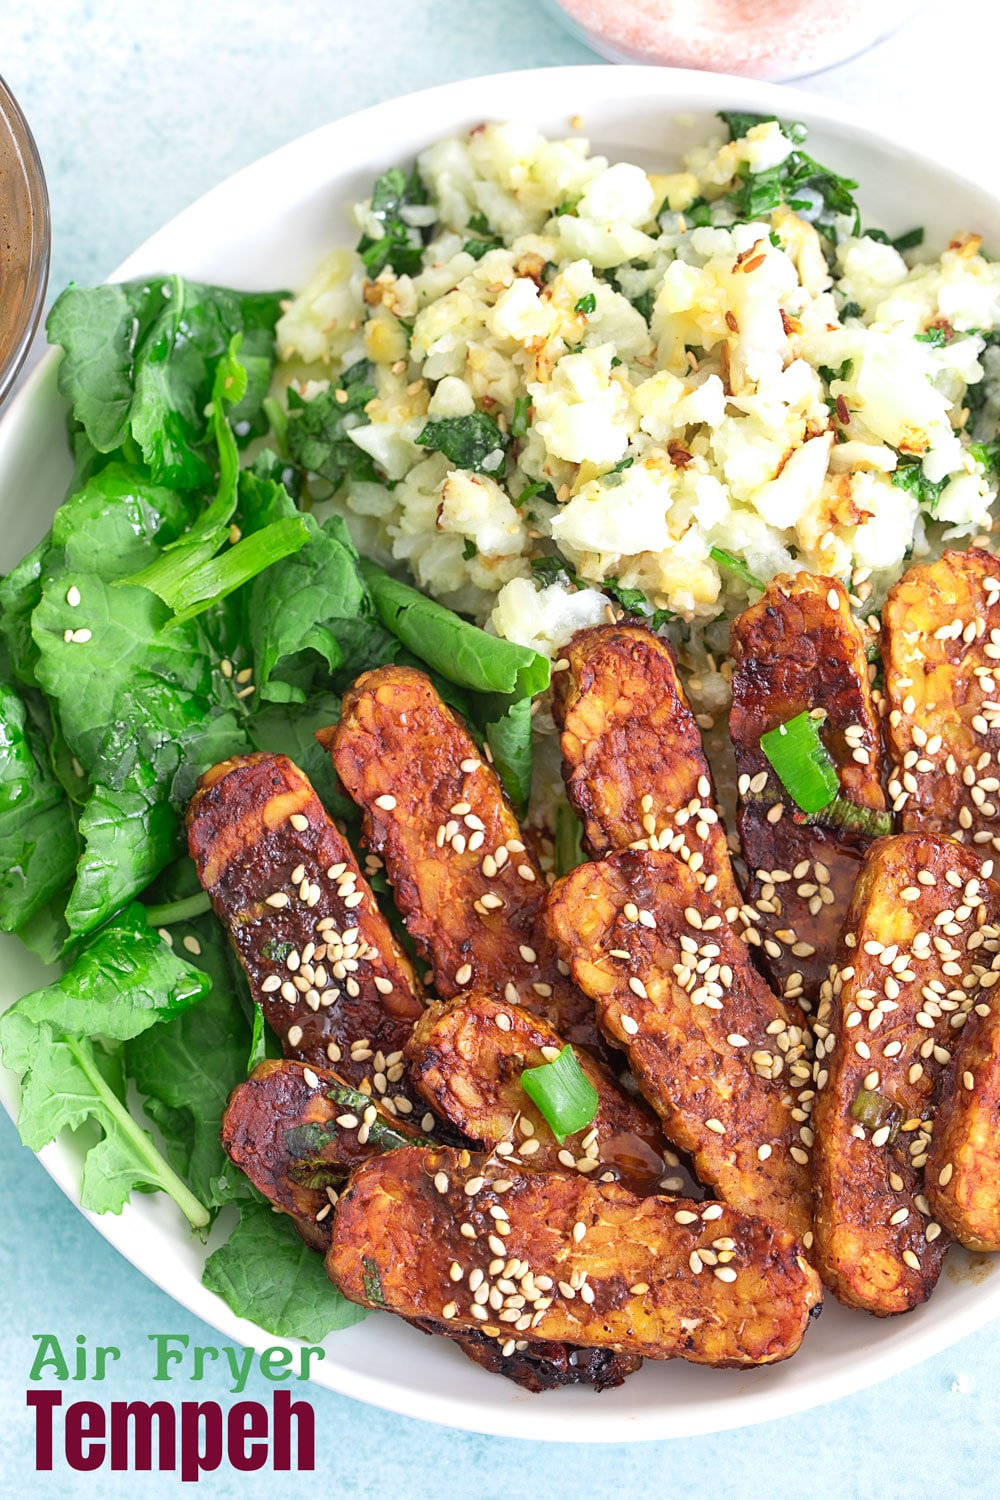 Top closeup view of tempeh in a bowl with sesame seeds for garnish